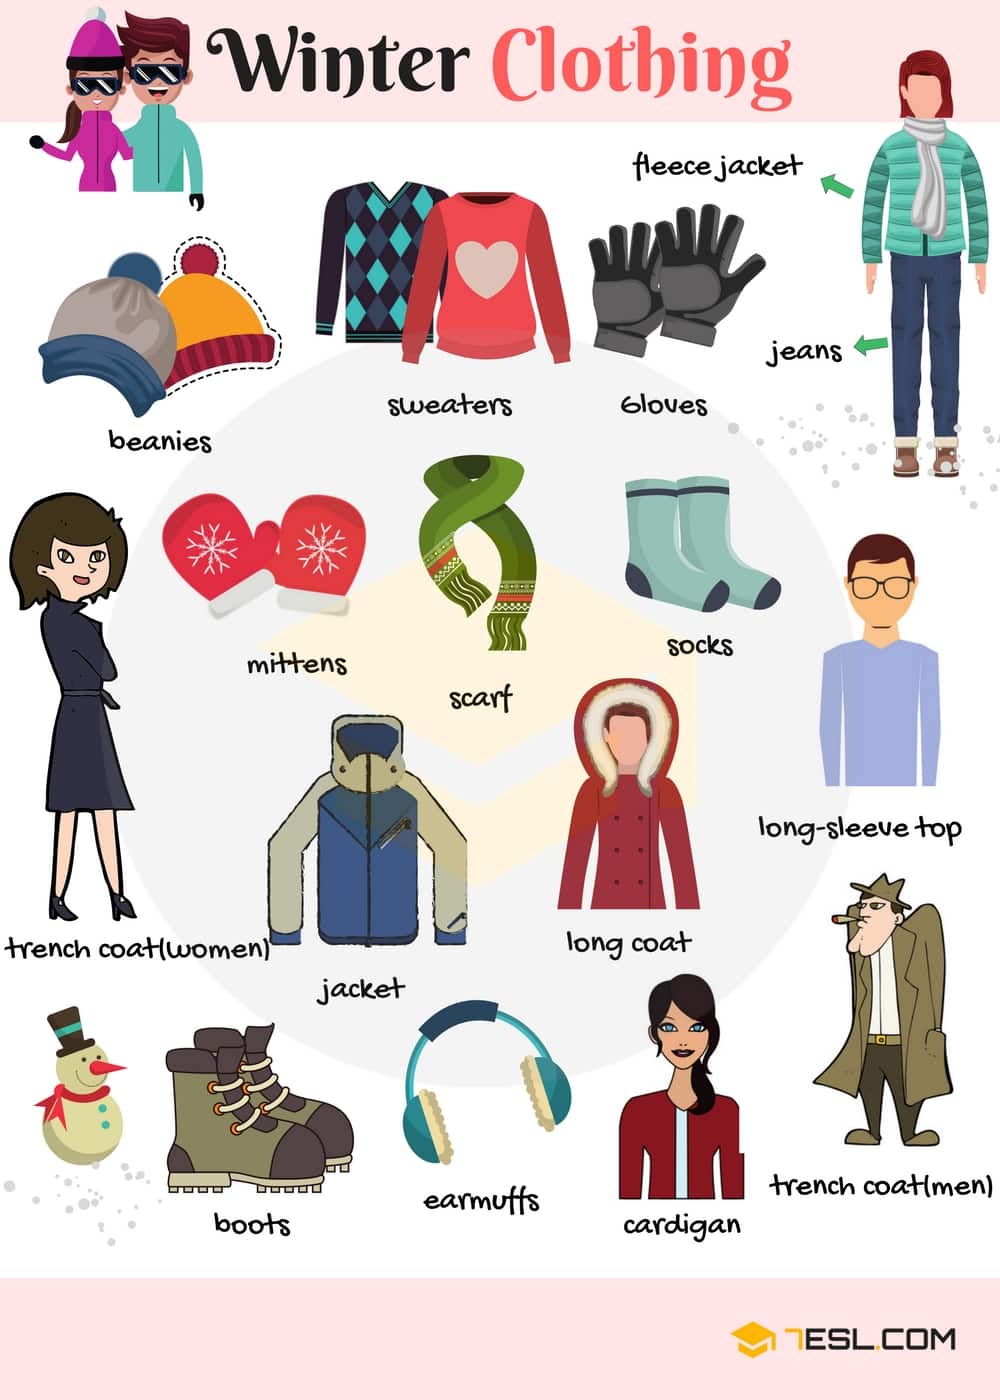 Winter Clothing Vocabulary in English